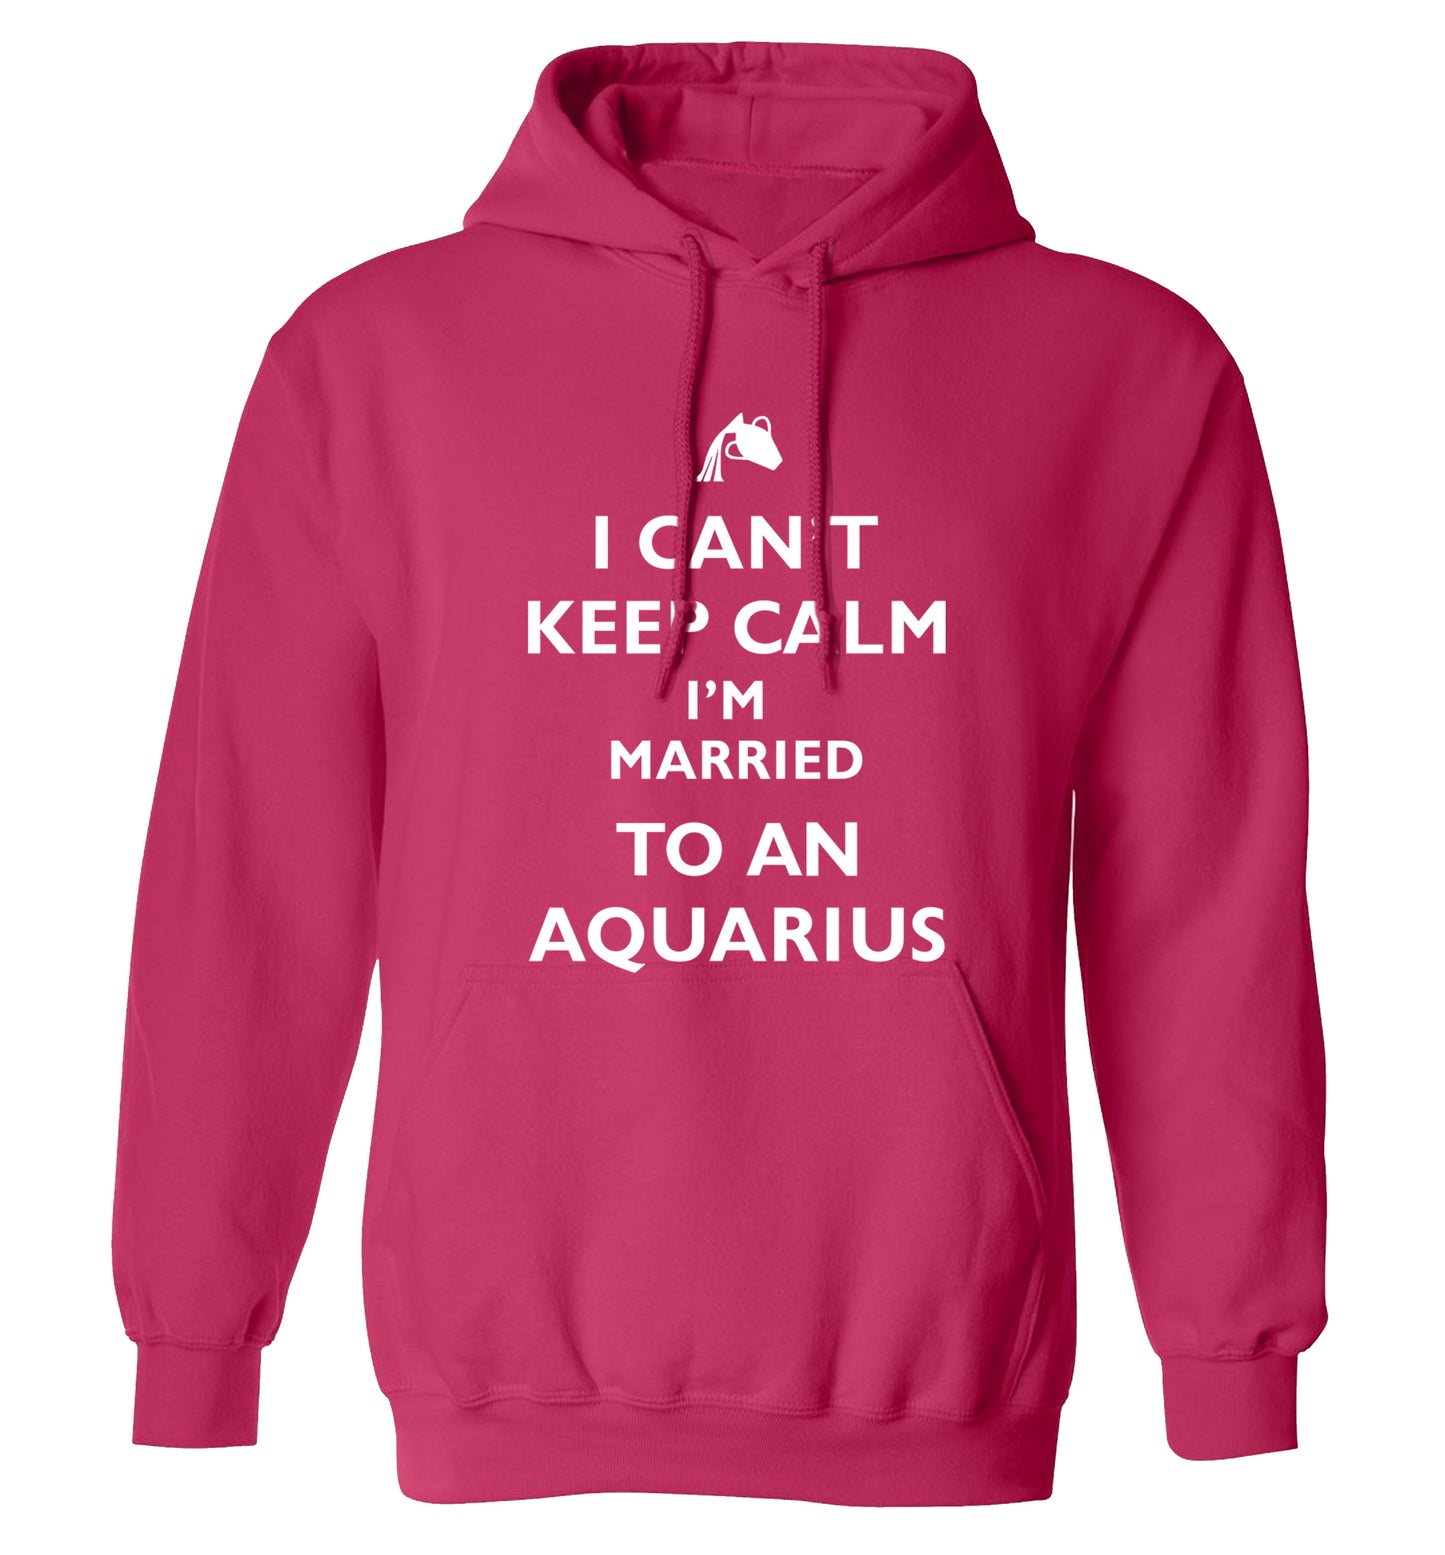 I can't keep calm I'm married to an aquarius adults unisex pink hoodie 2XL